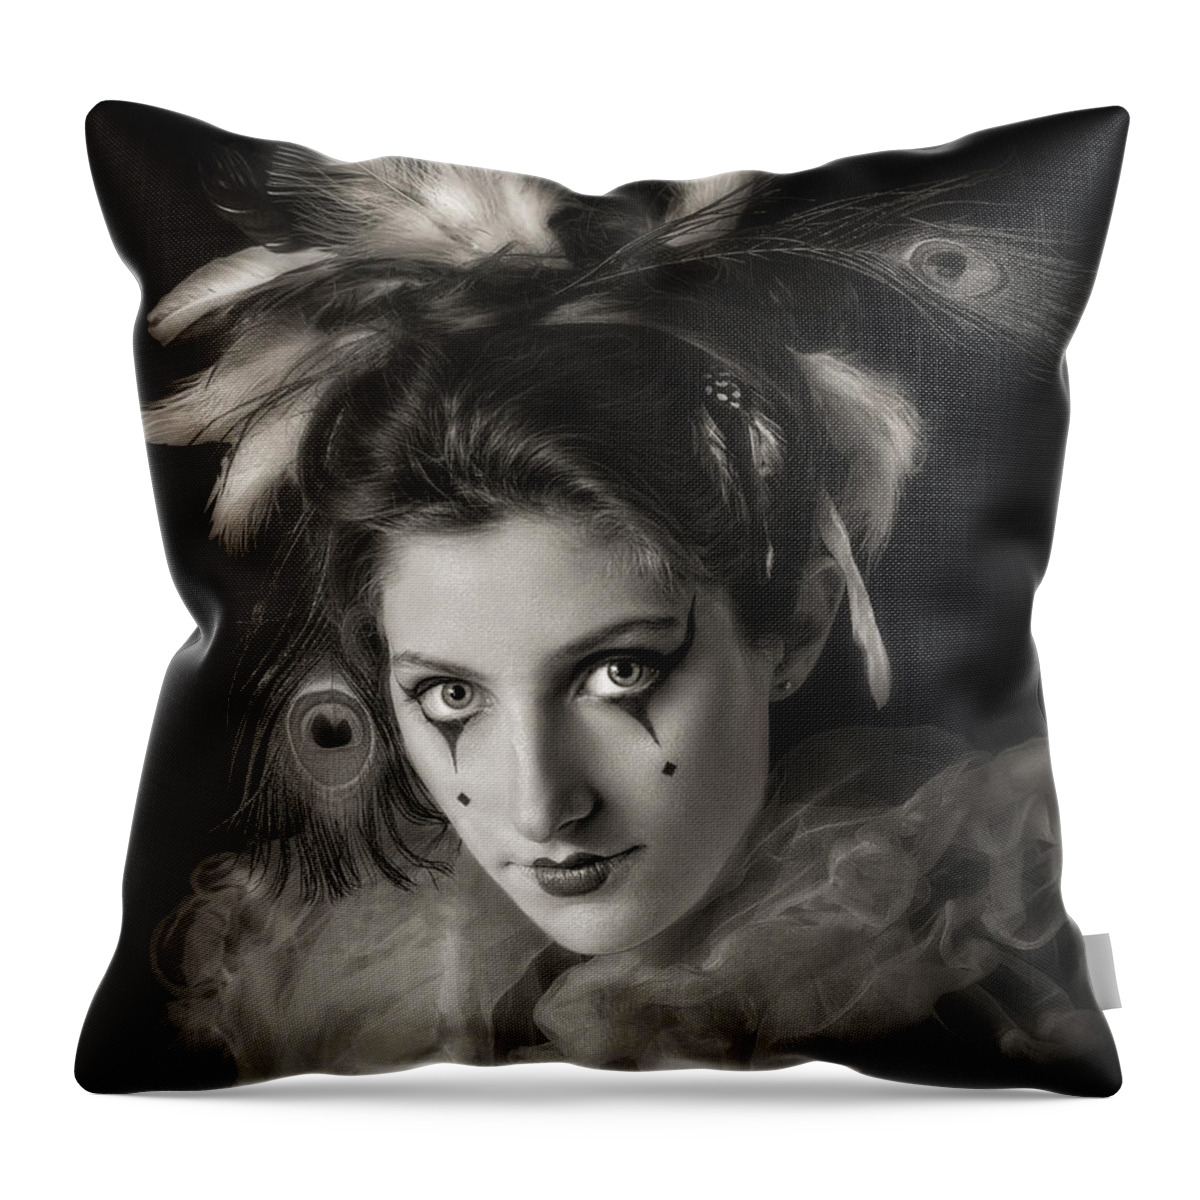 Clown Throw Pillow featuring the photograph Colombina by Endre Balogh